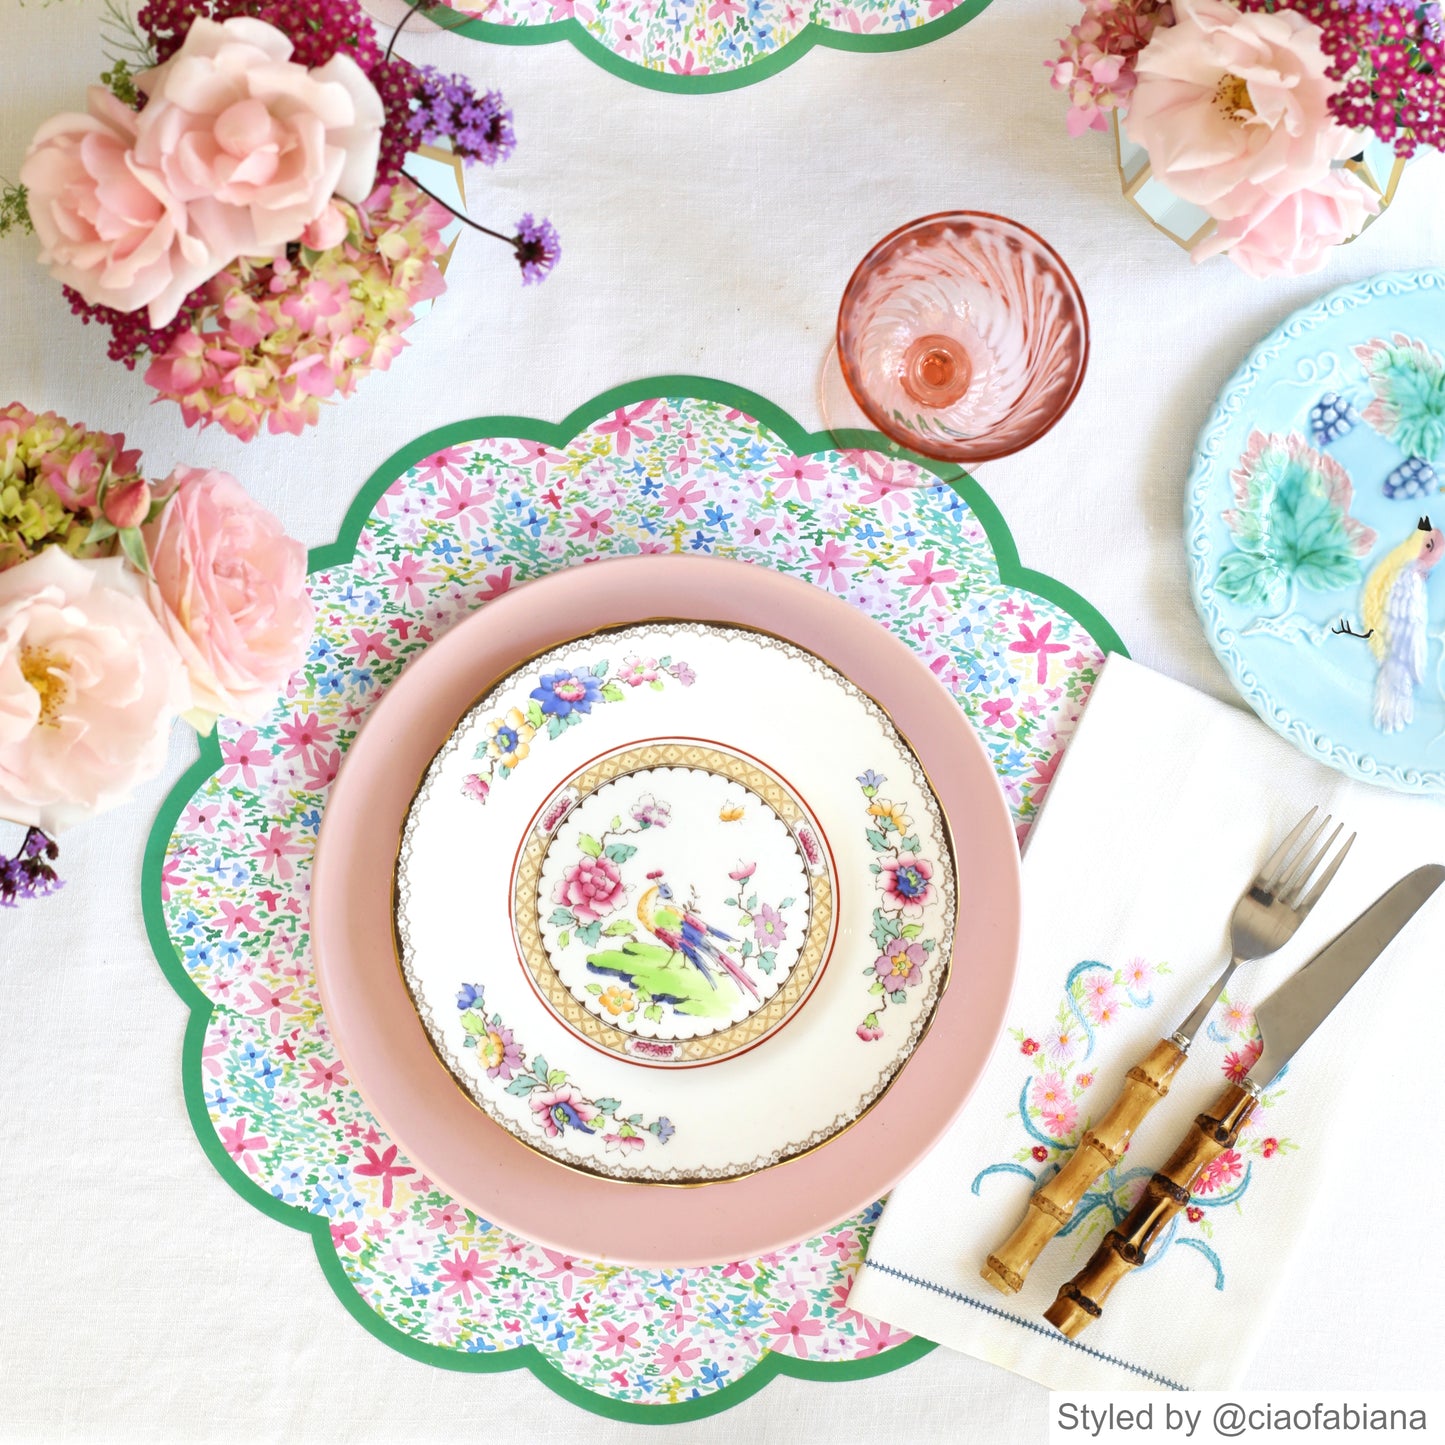 Pink and green place setting